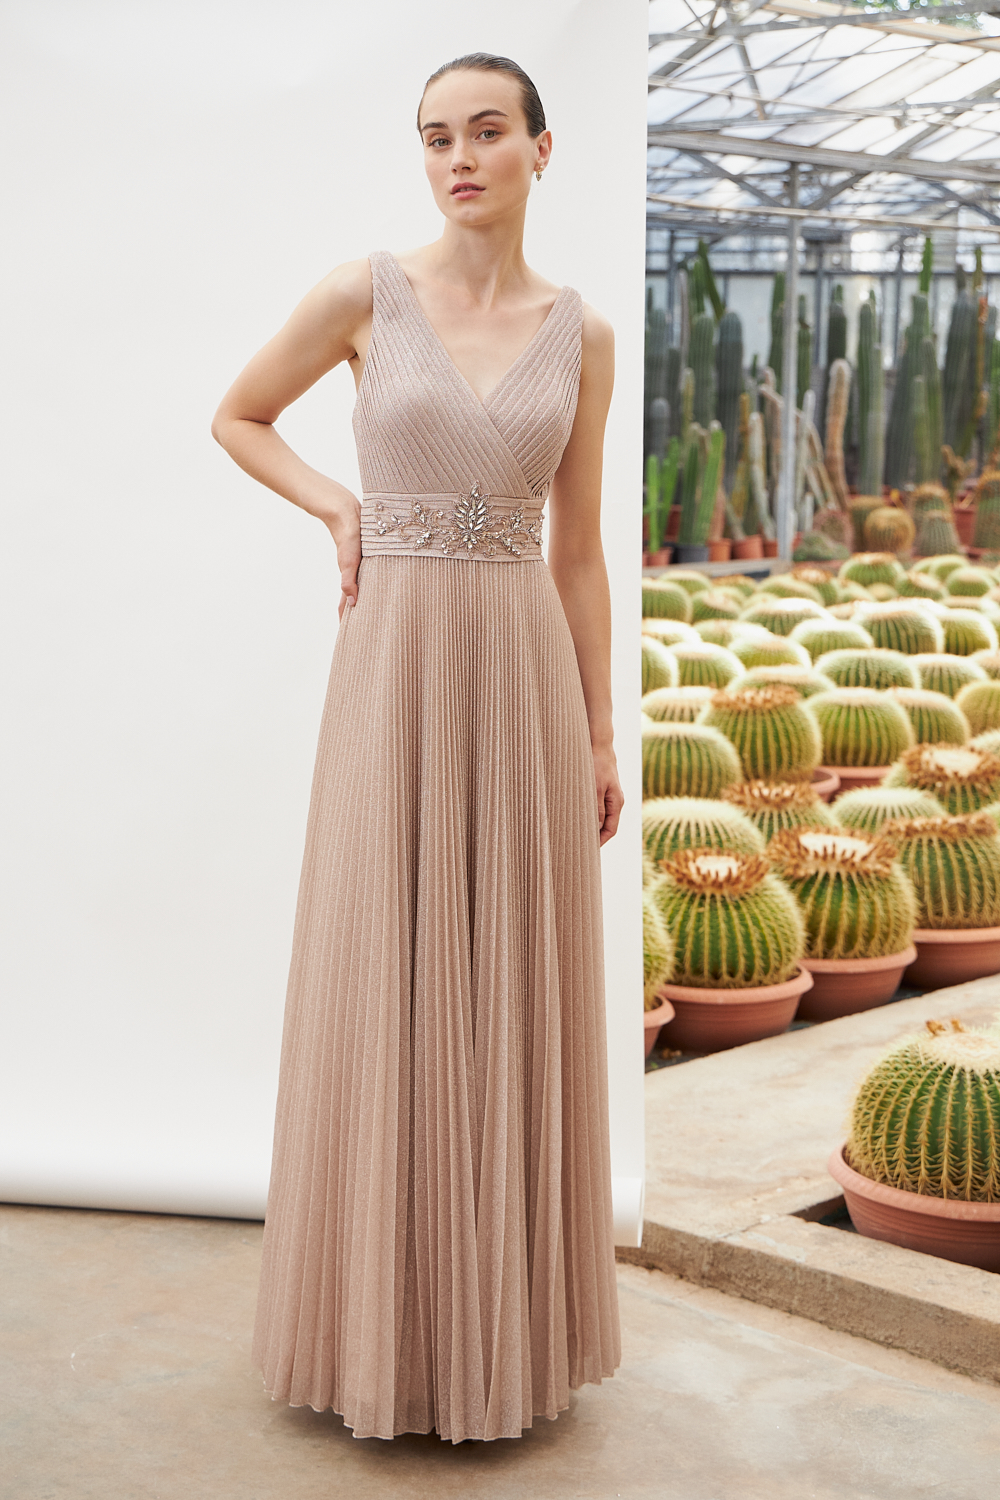 Вечерние платья / Long evening dress with shining fabric, wide straps and beading at the waist